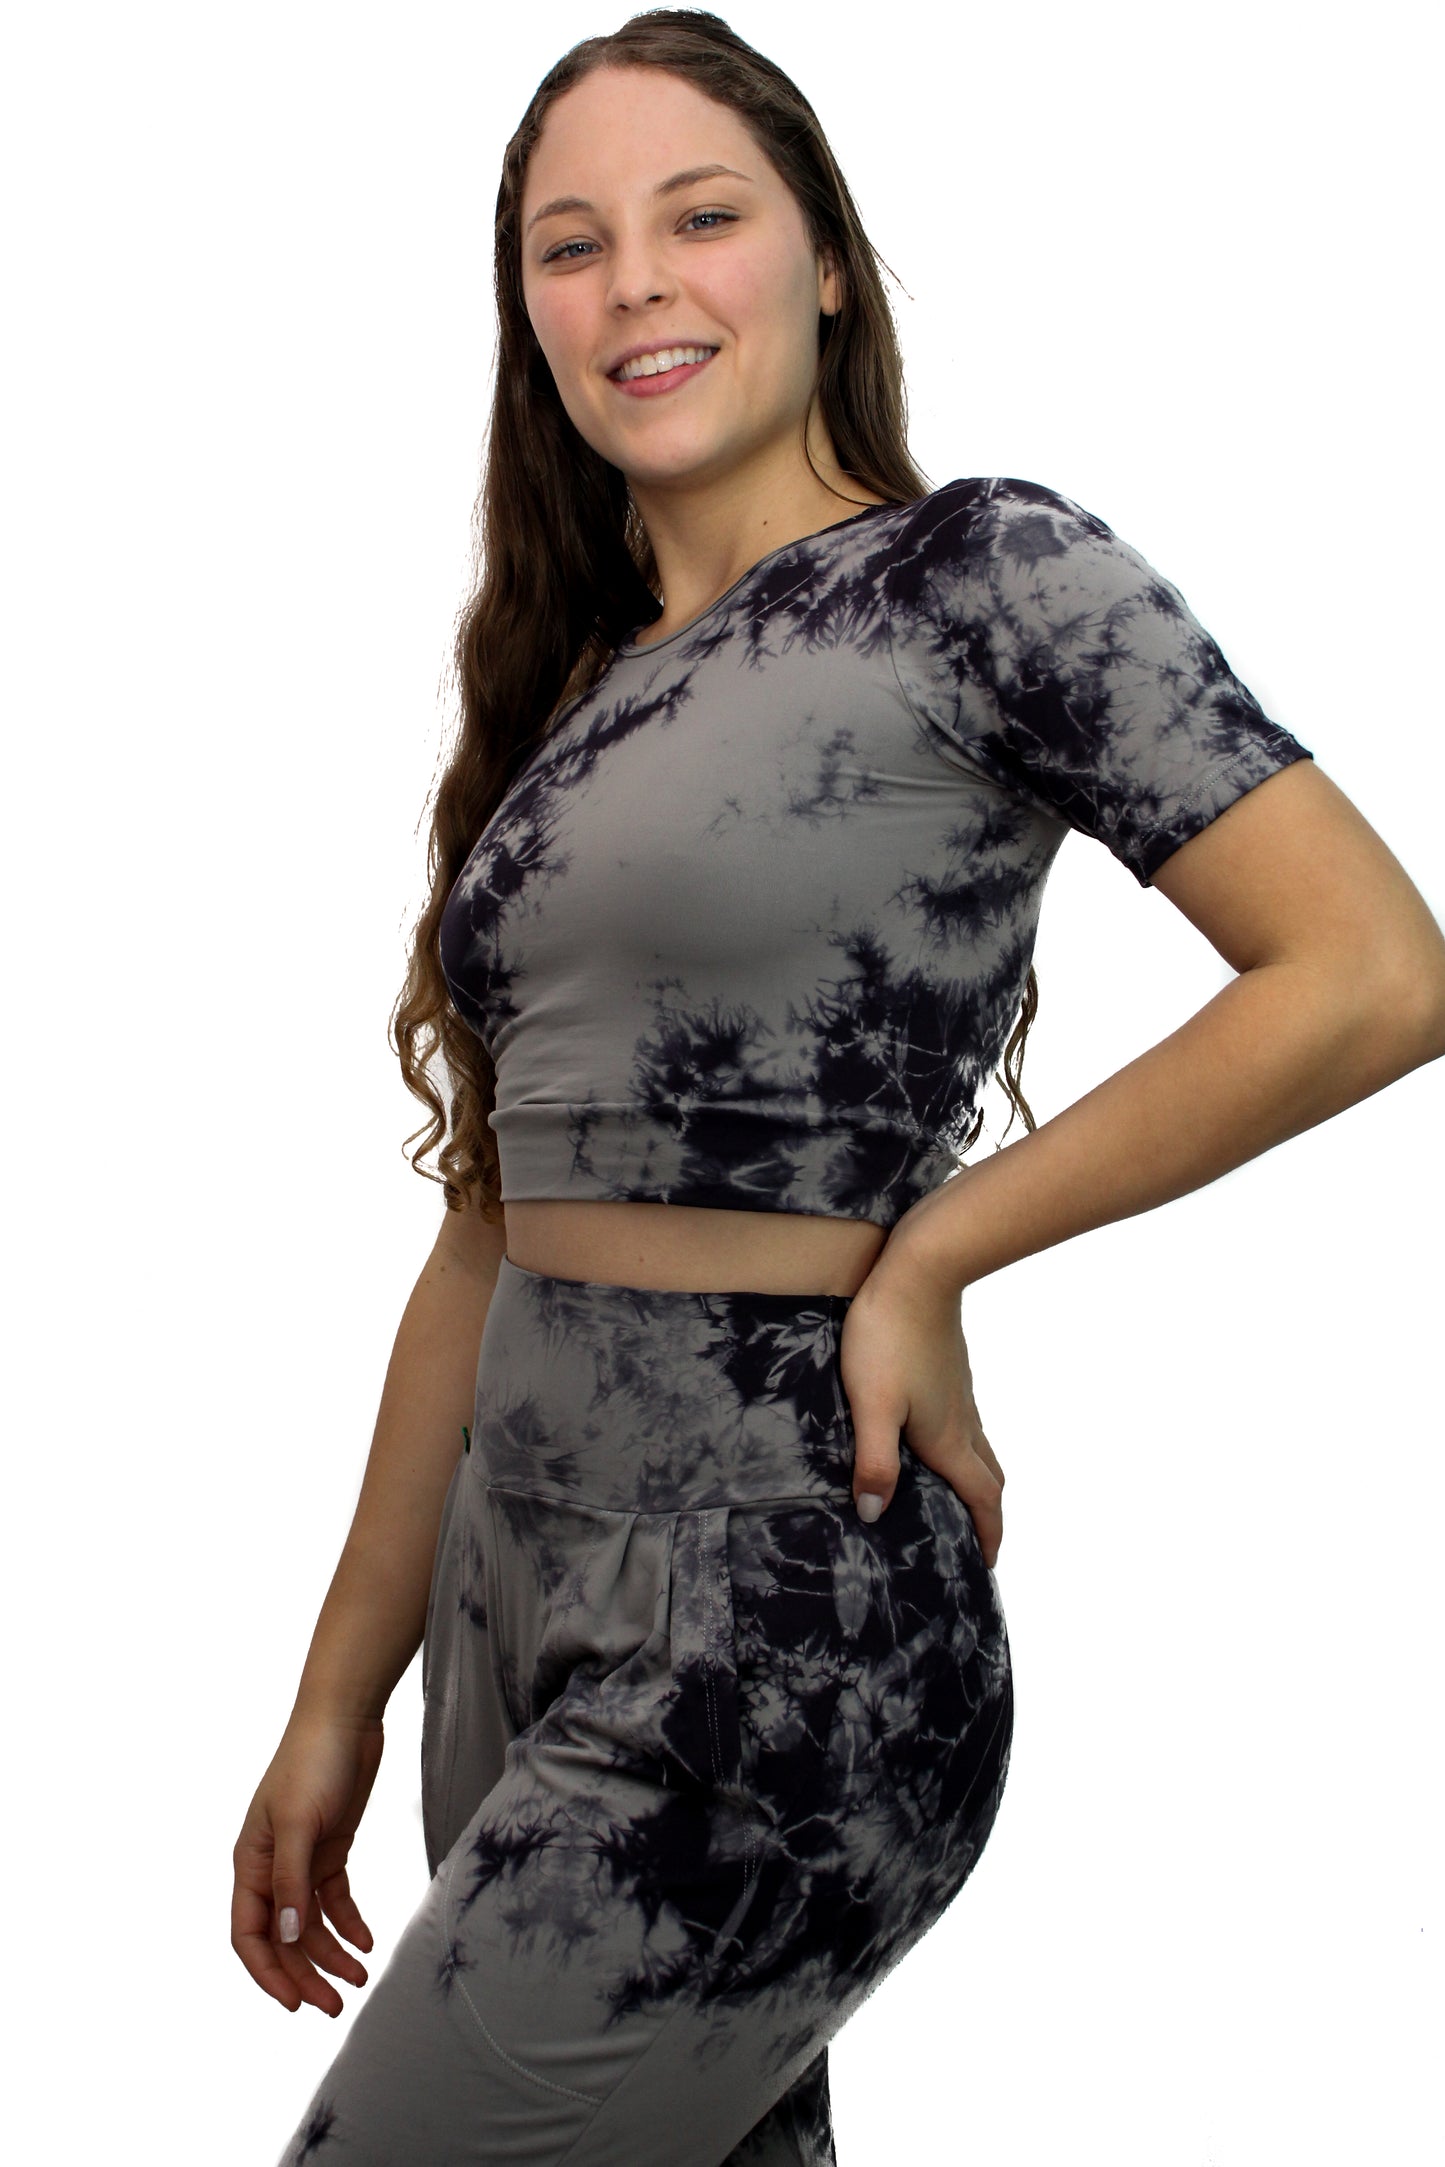 Classic Crop Short Sleeves - black and gray Tie Dye